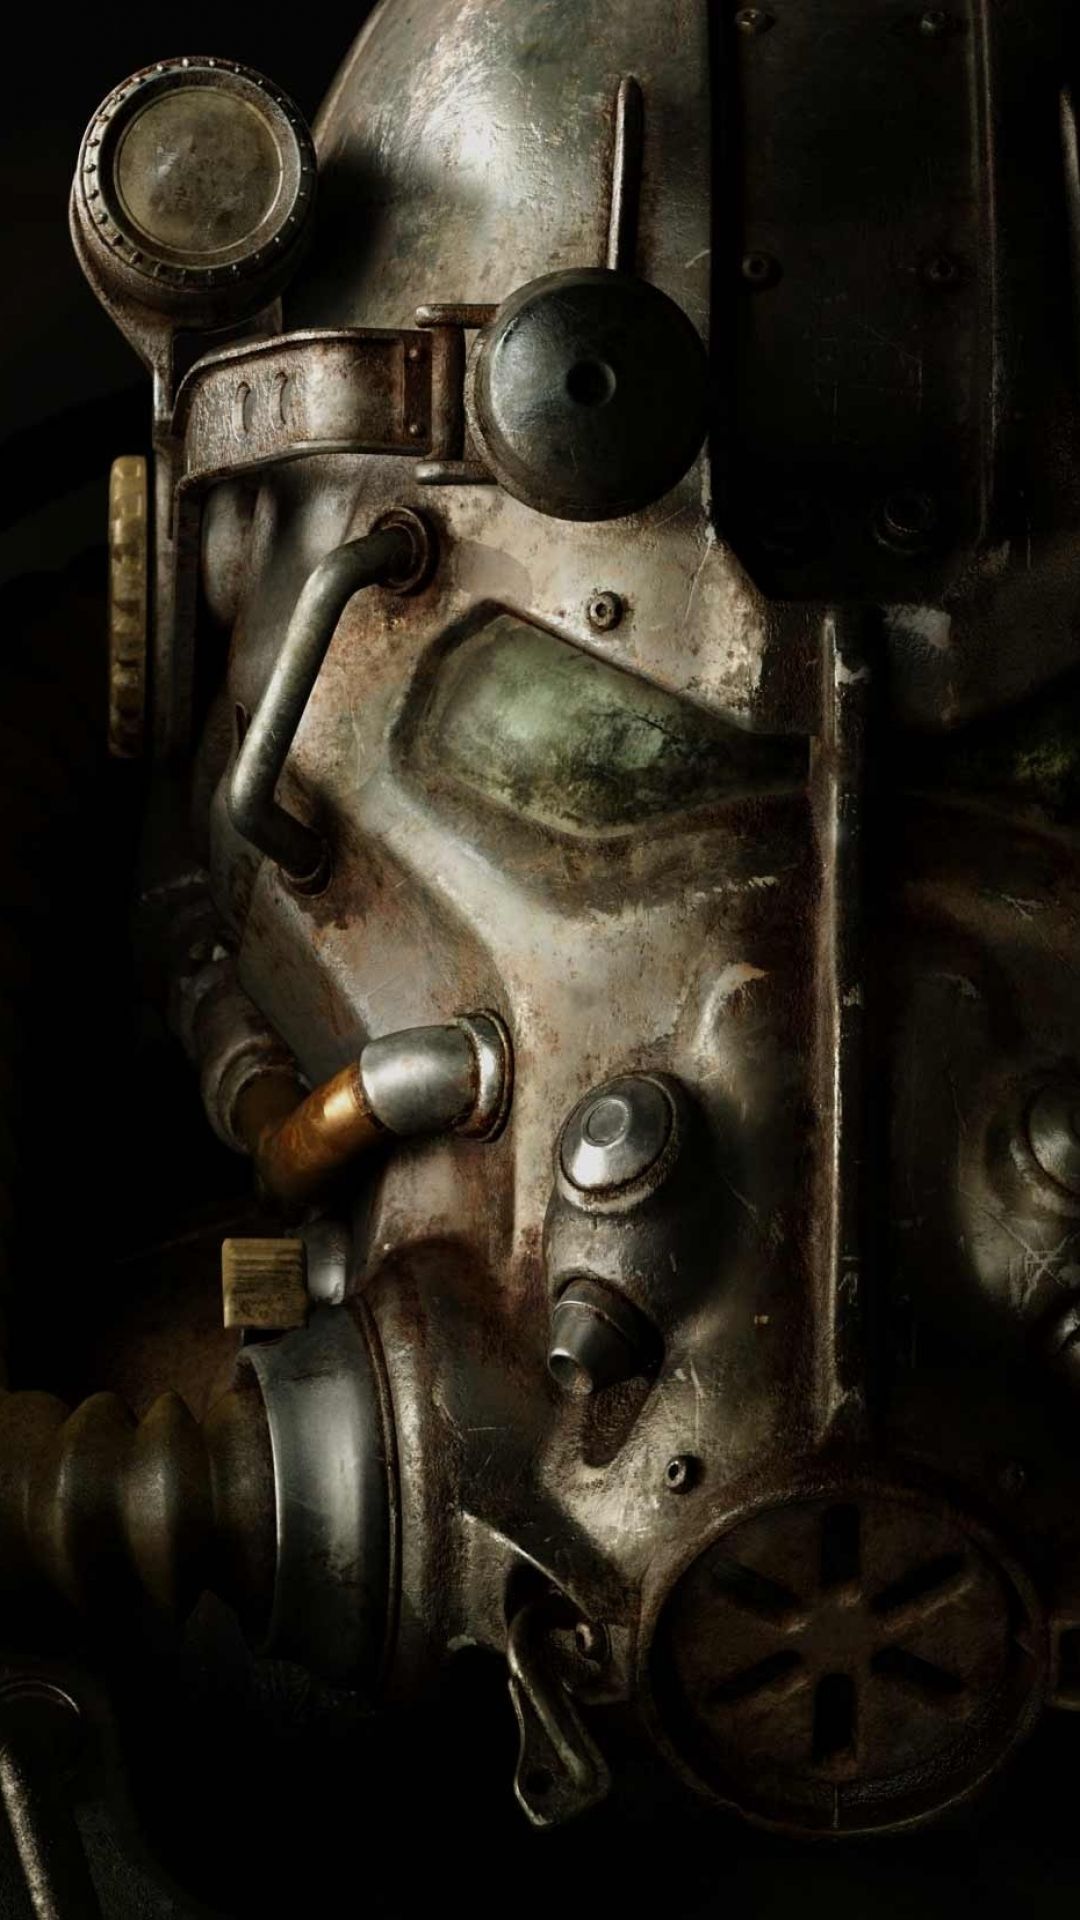 iPhone 6 Plus - Video Game/Fallout 4 - Wallpaper ID: 534141